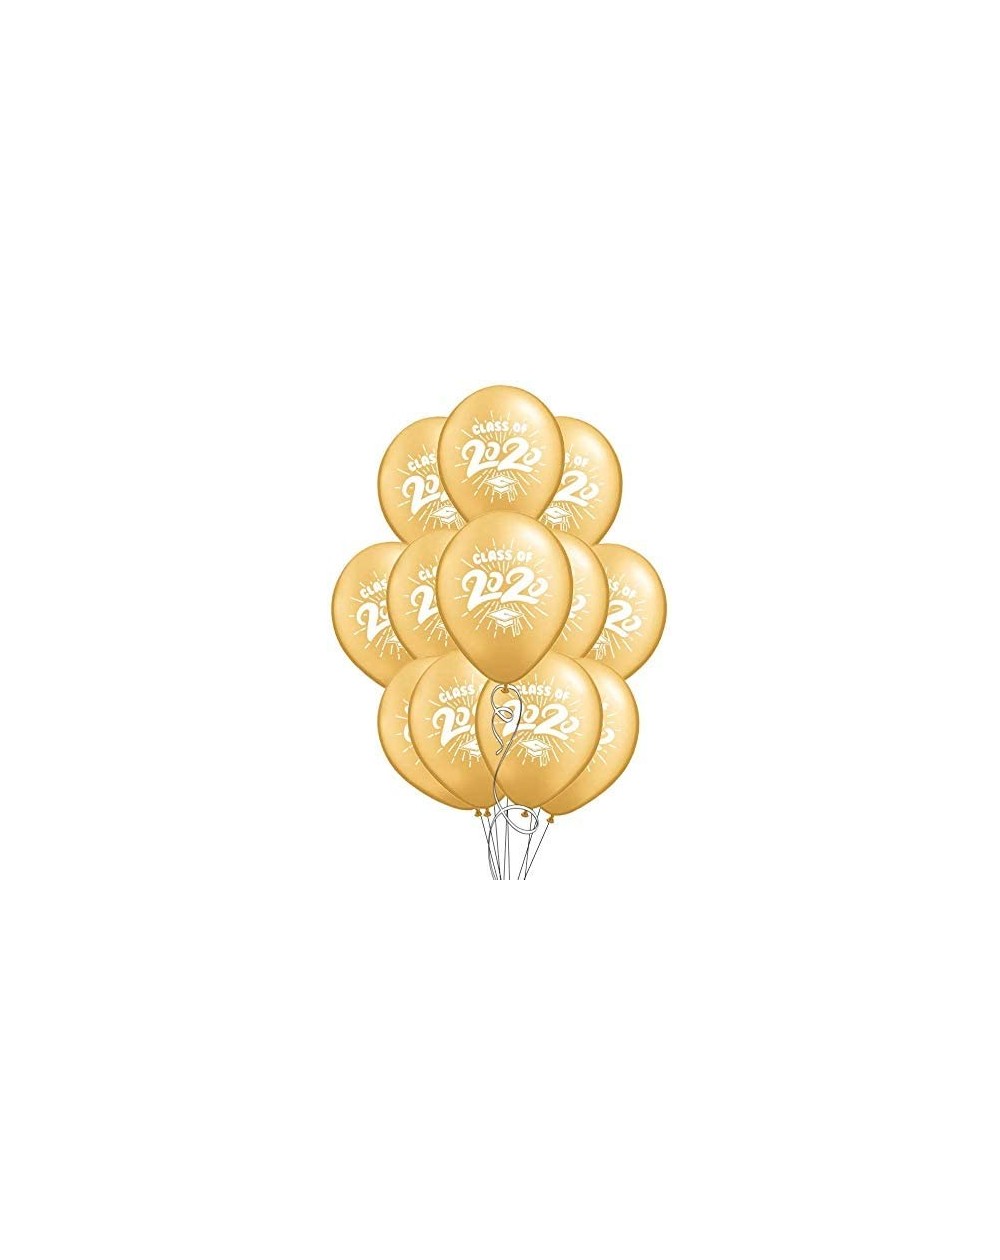 Balloons School Colors Graduation 11" Latex Balloons in Gold - Pack of 50 - Gold - 50 Pack - C719C58DK0D $22.28